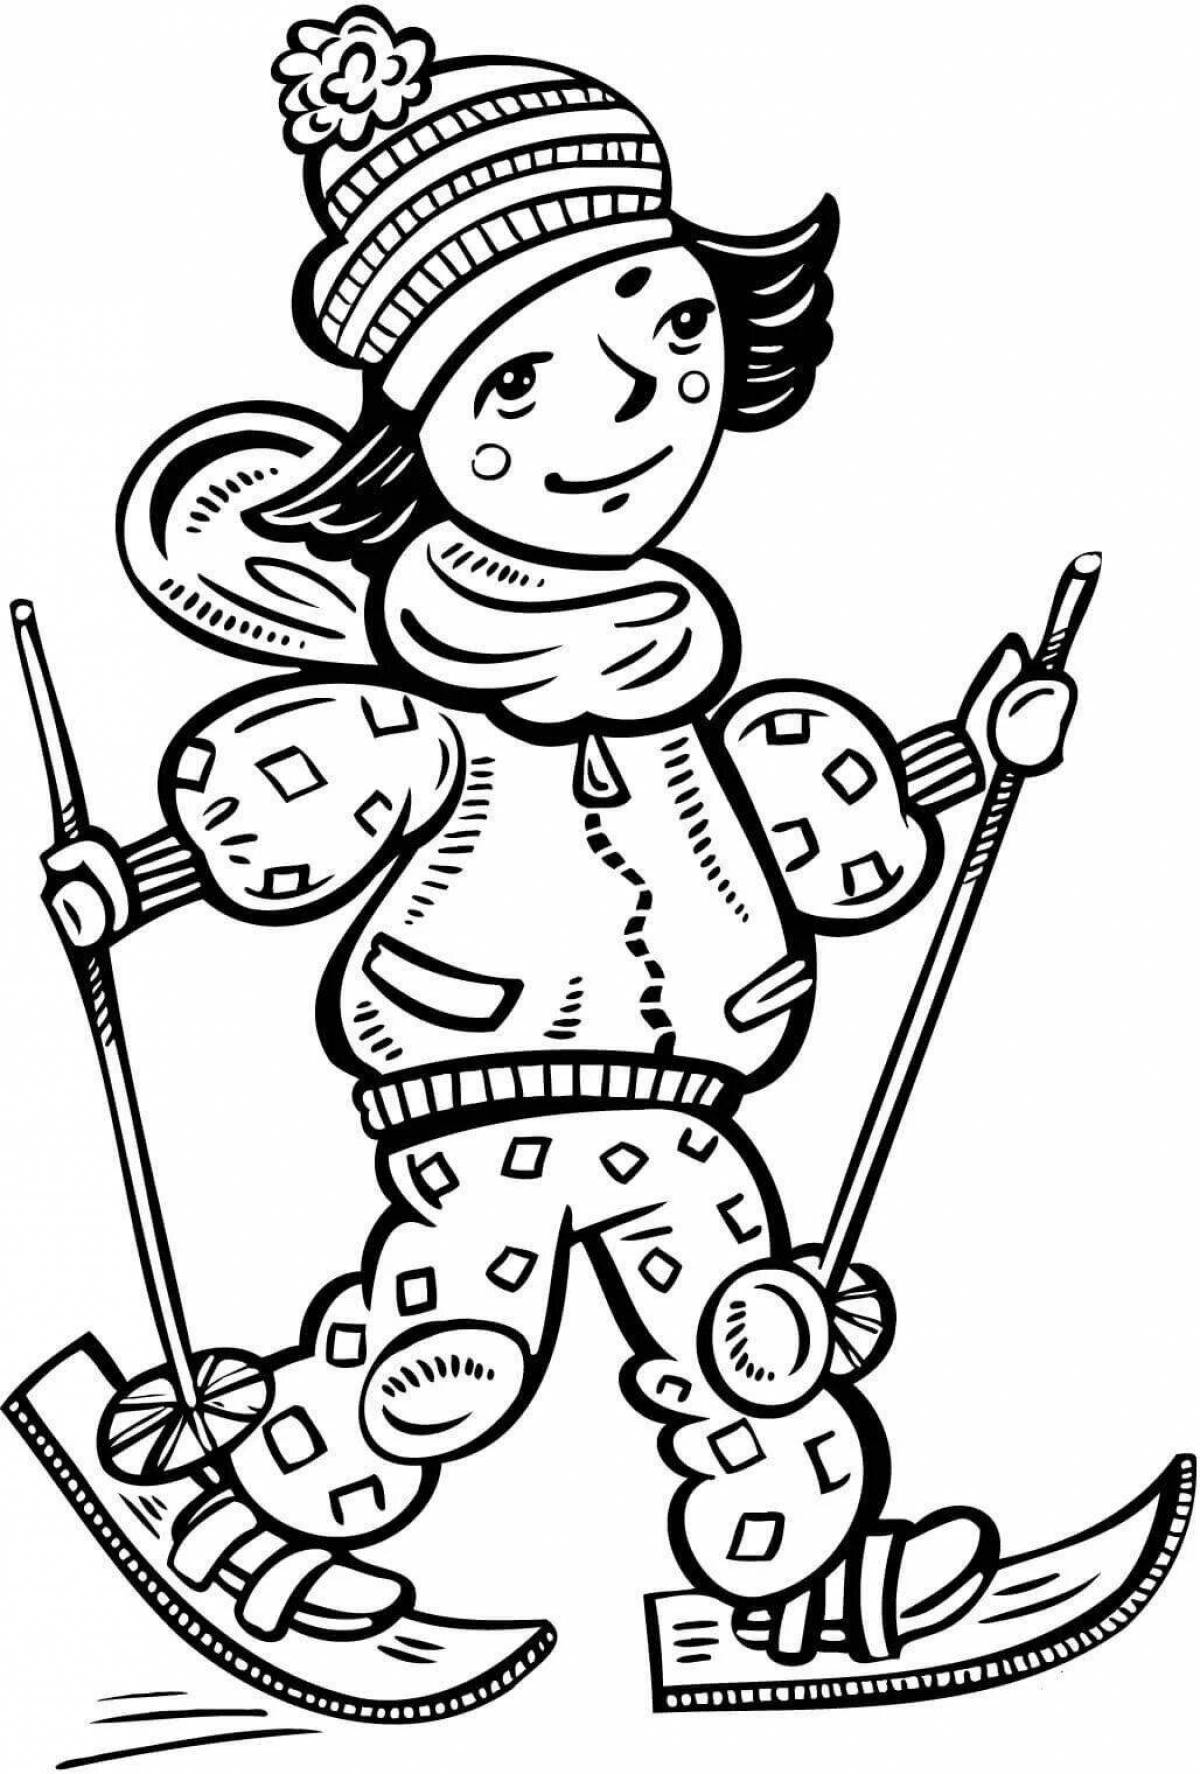 Fun coloring book skier for kids